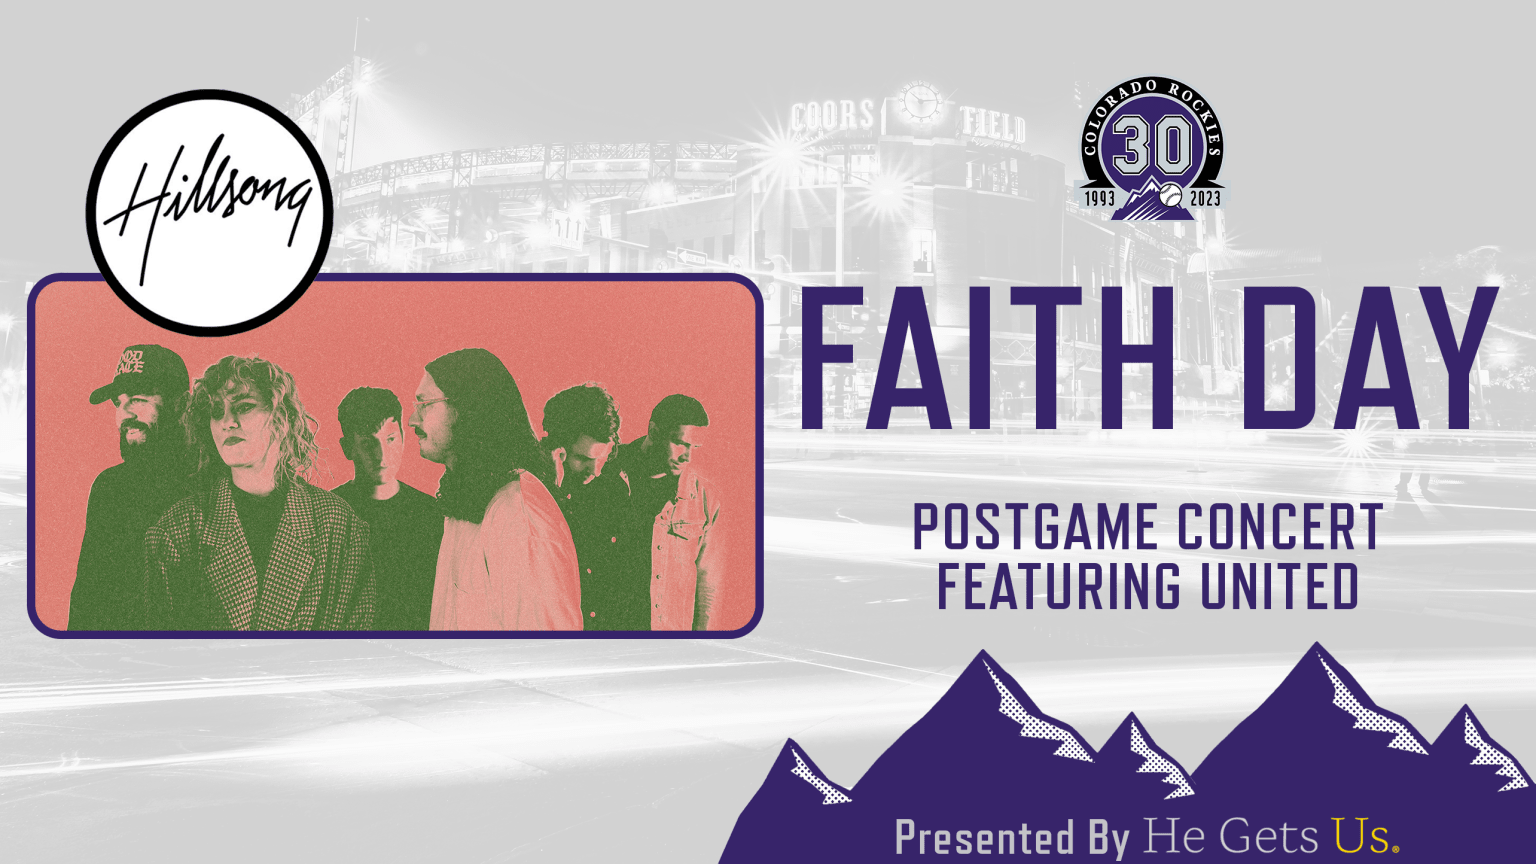 Colorado Rockies - Summer sunsets at Coors Field 󾮟